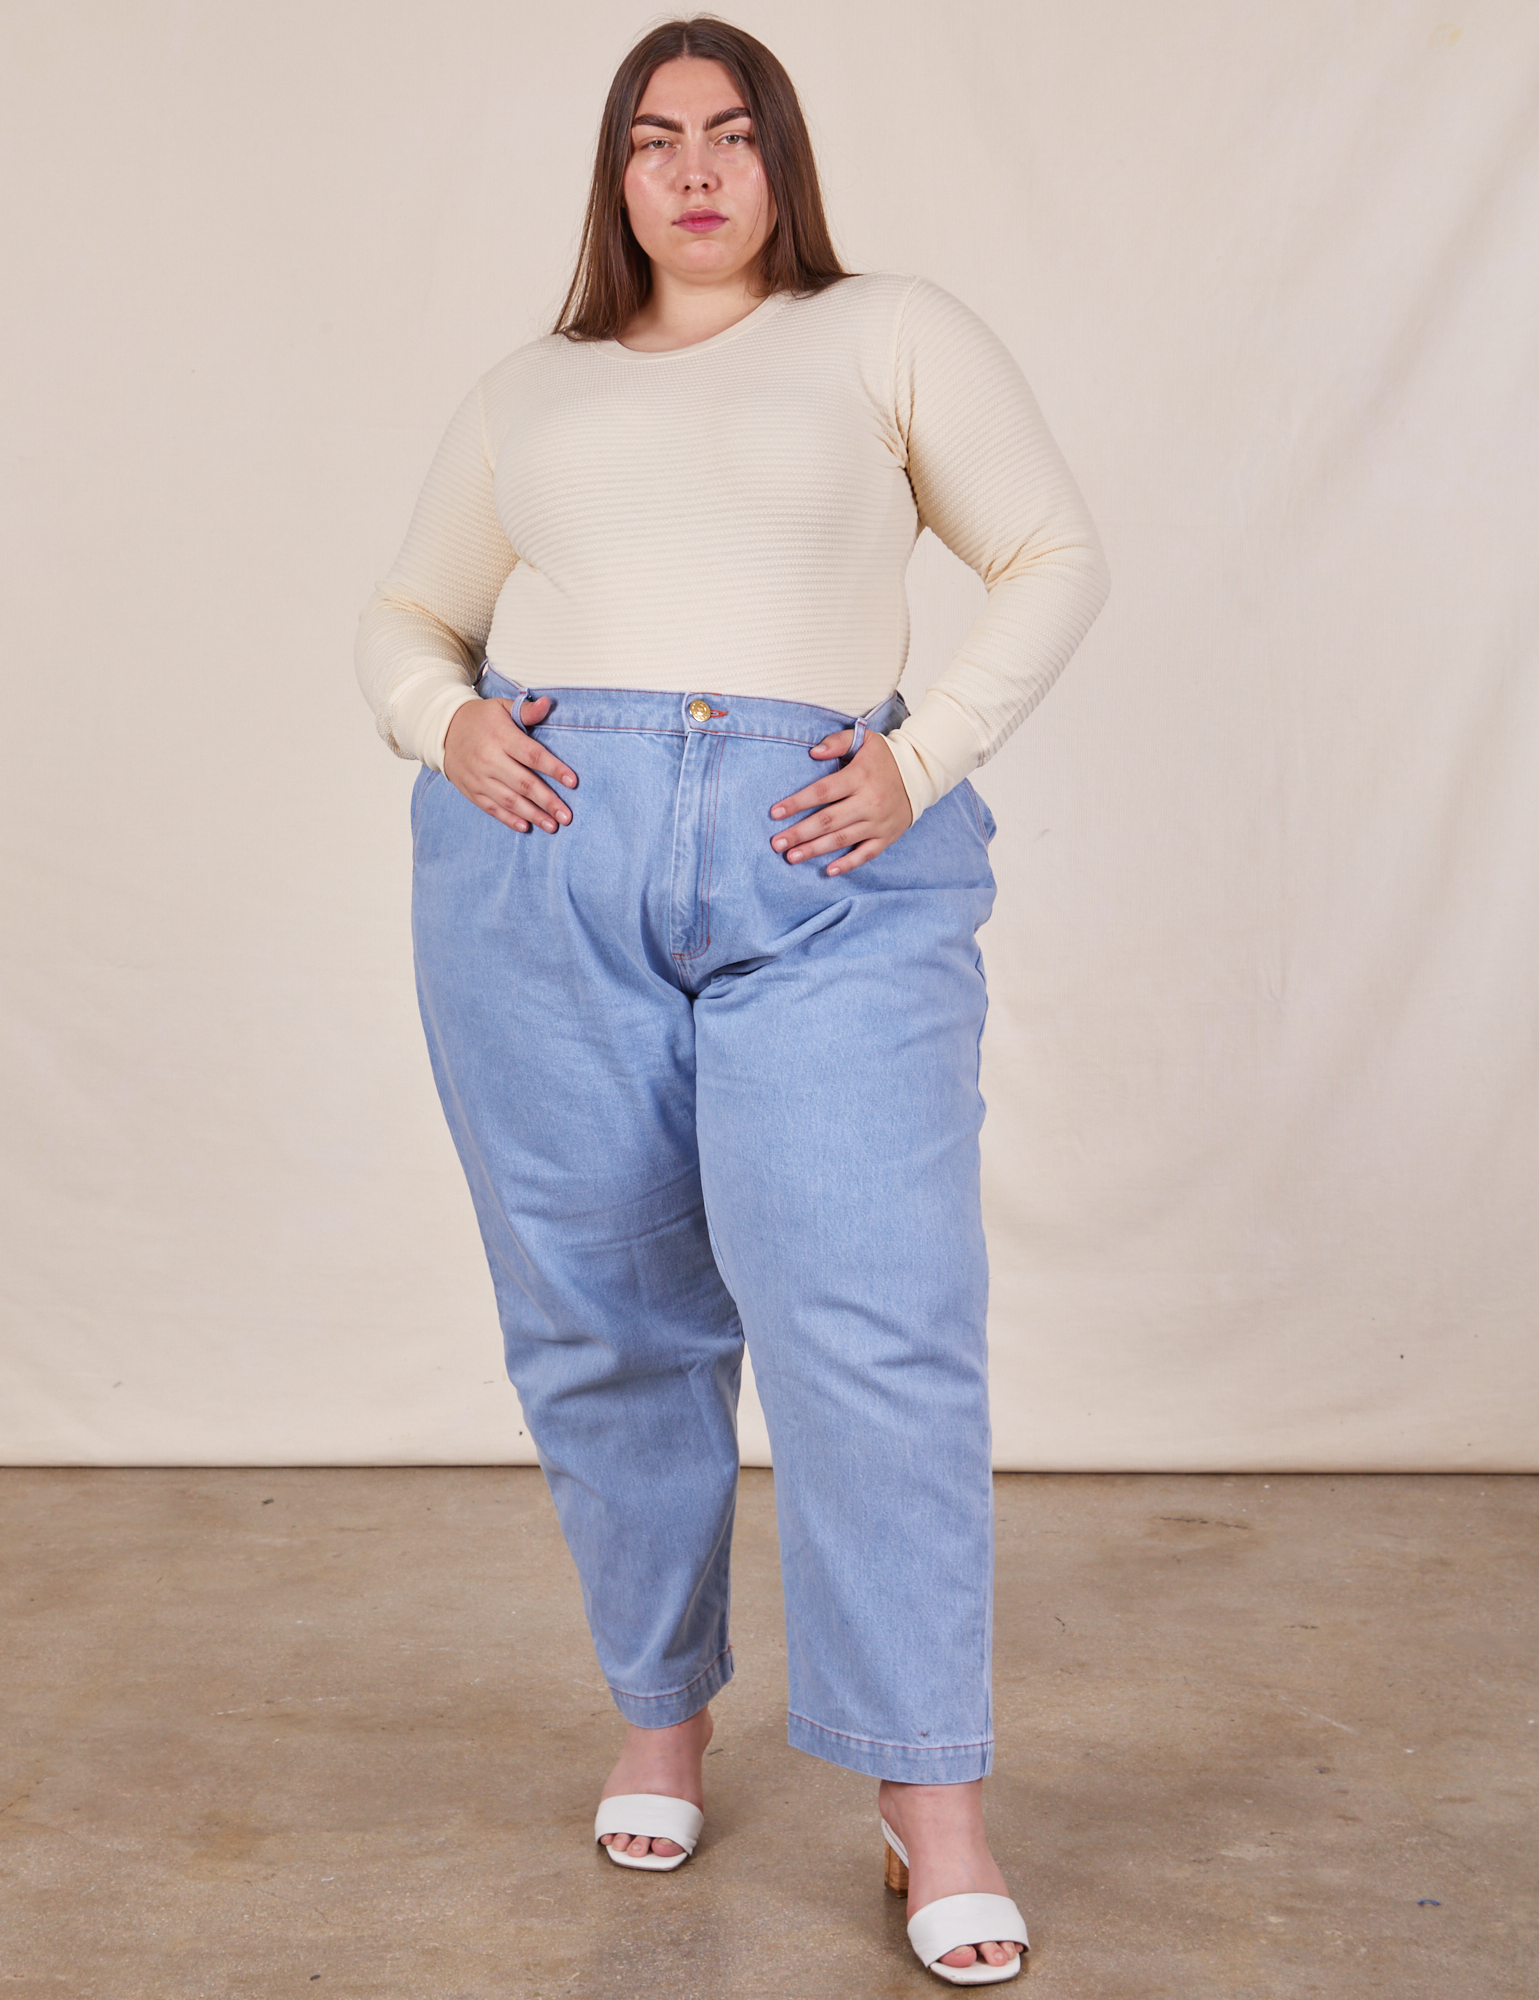 Marielena is wearing Honeycomb Thermal in Vintage Off-White and light wash Denim Trousers